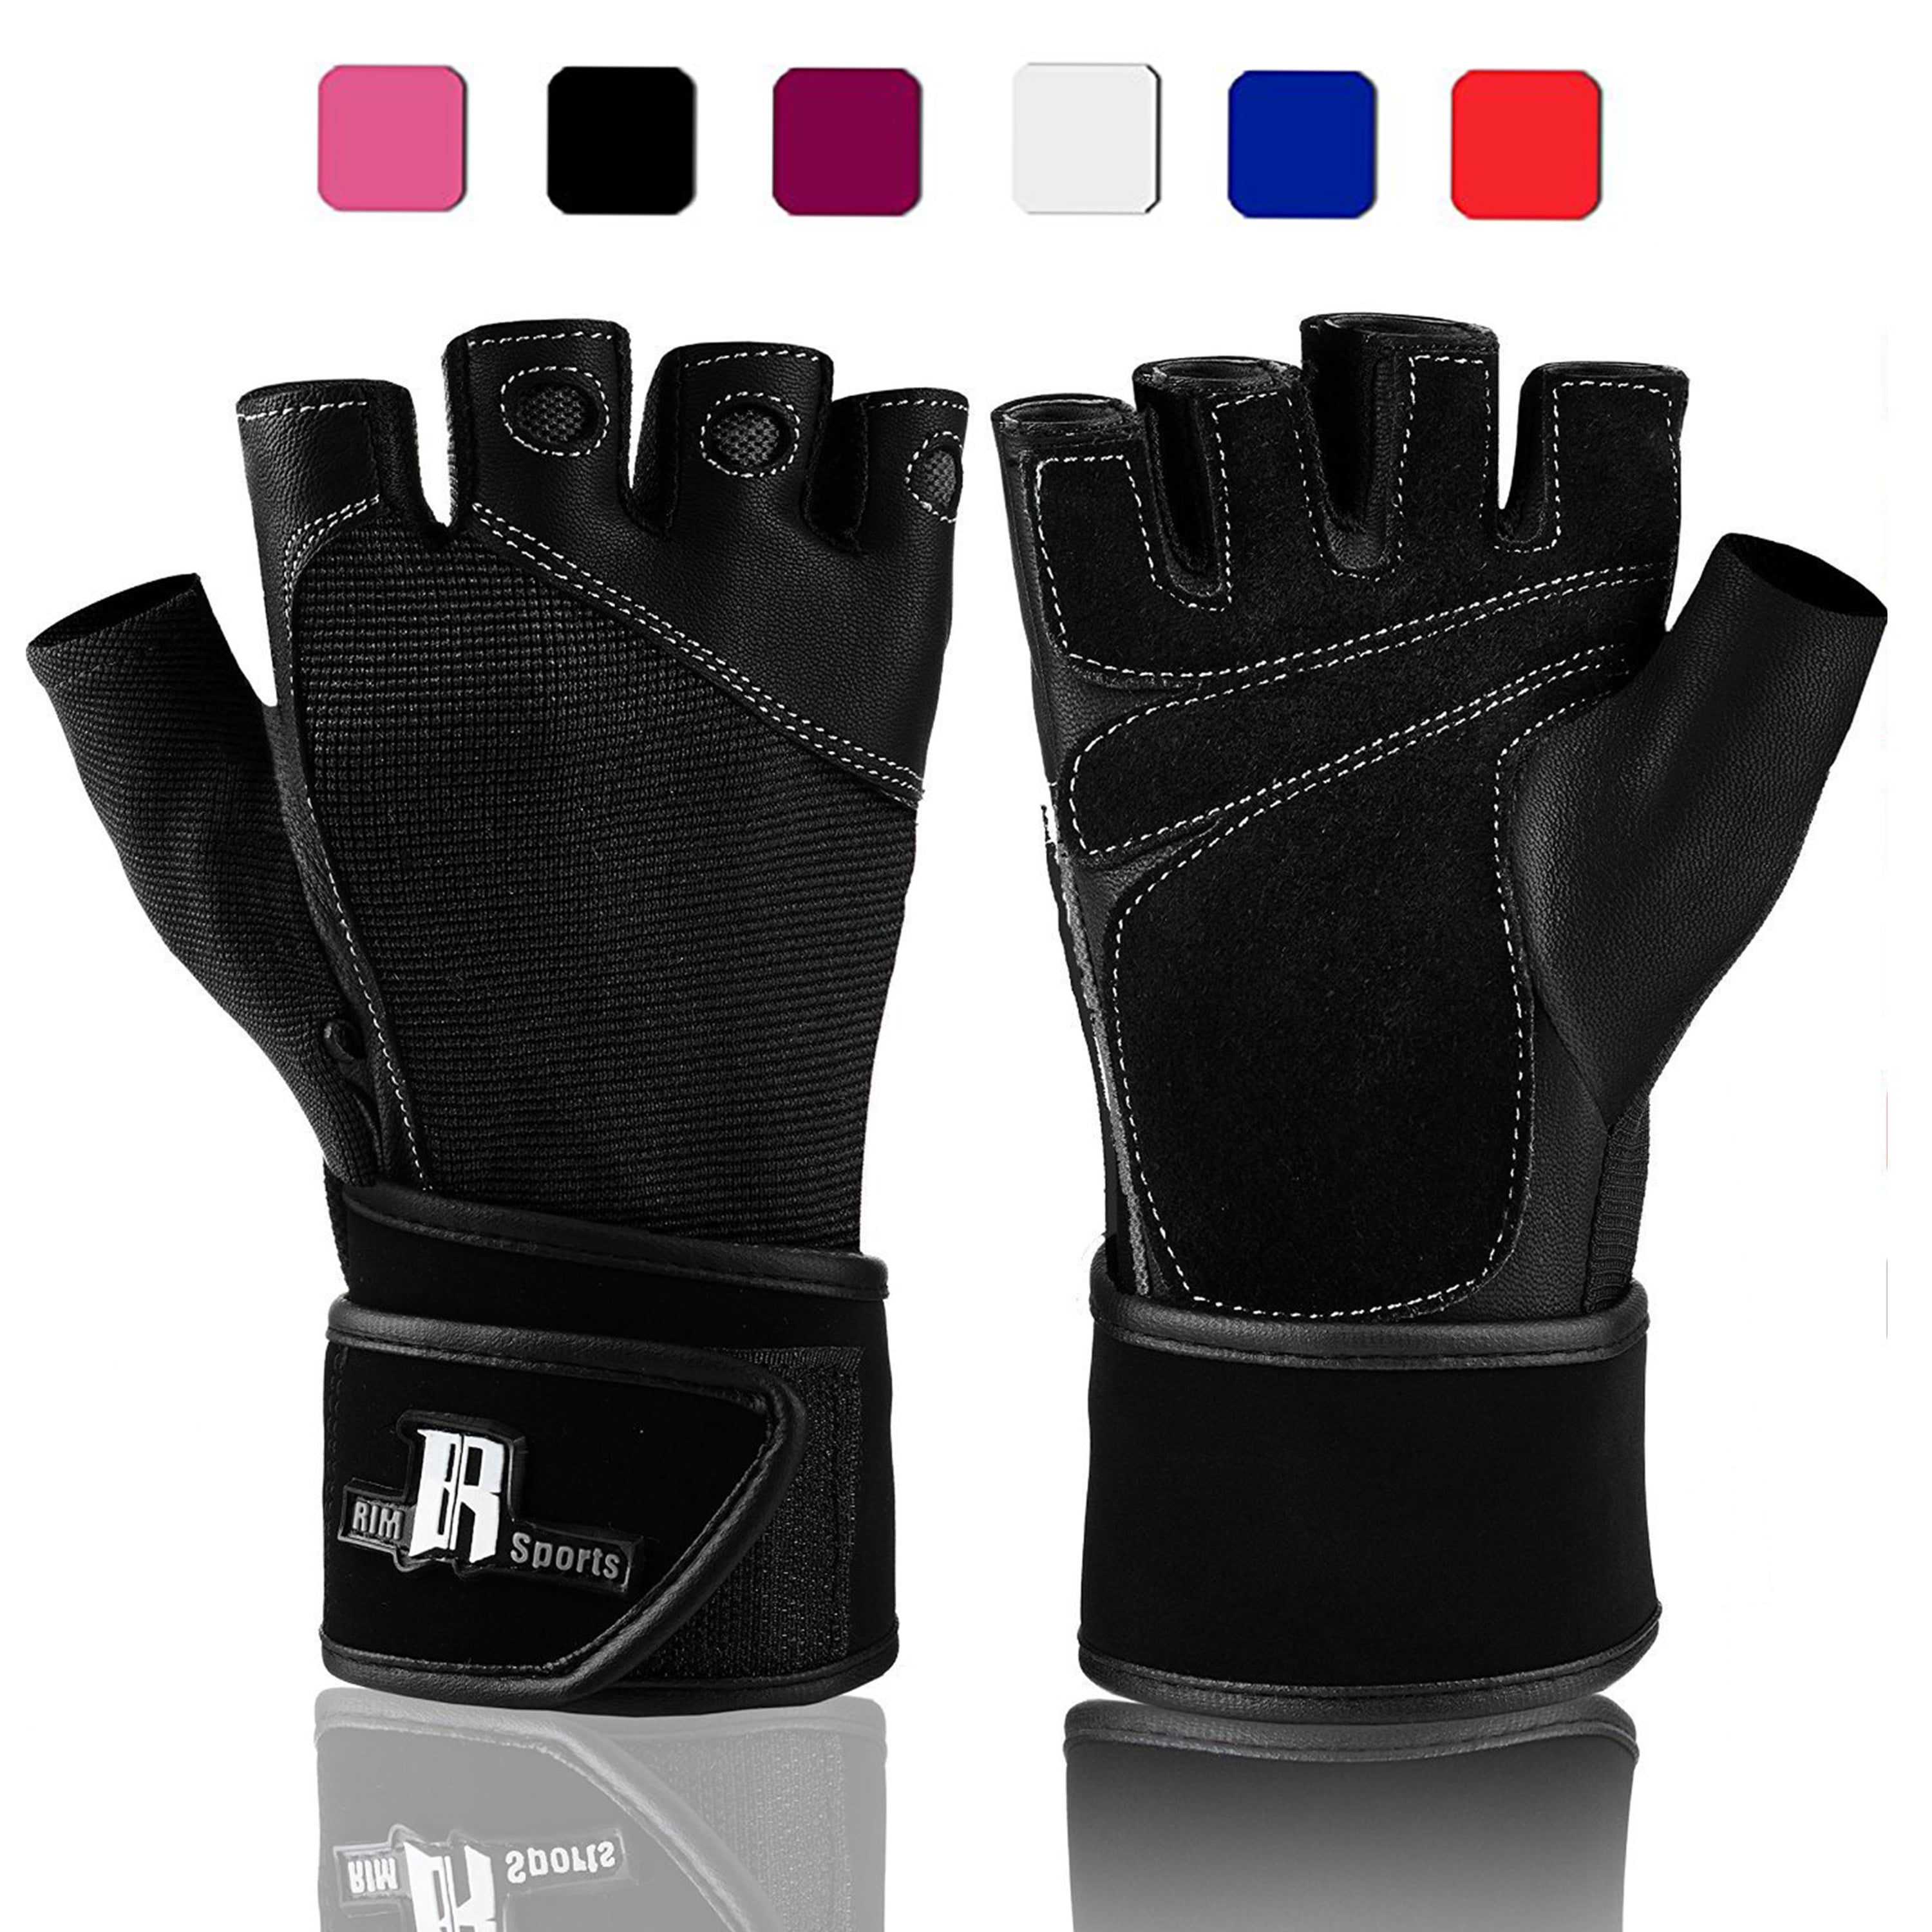 Men Women Gym Gloves With Wrist Wrap Support For Weight Cxz liu12 